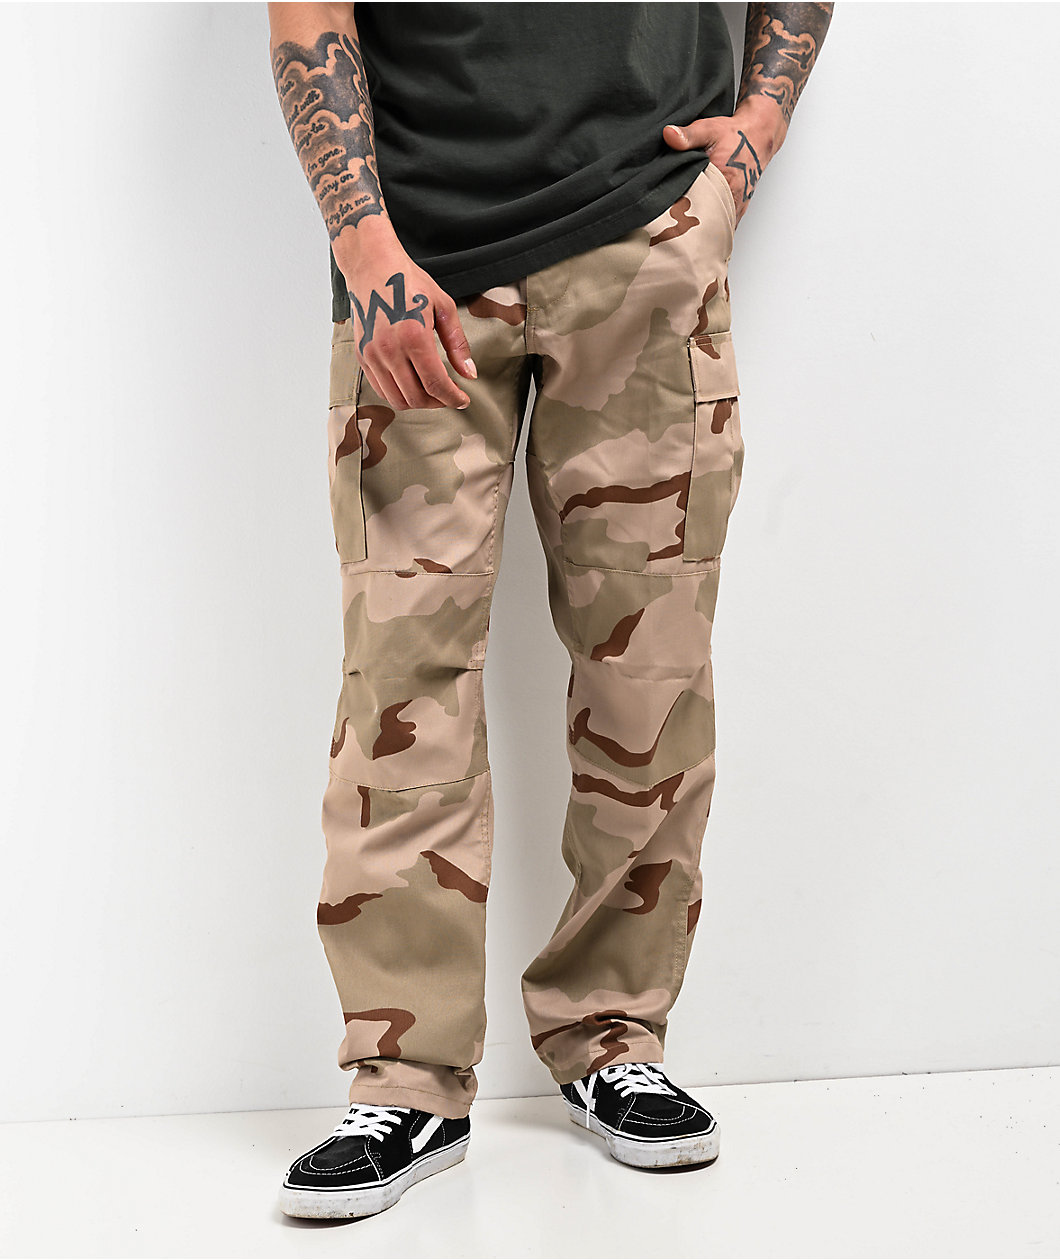 Rothco BDU Tri-Color Desert Camouflage Cargo Pants